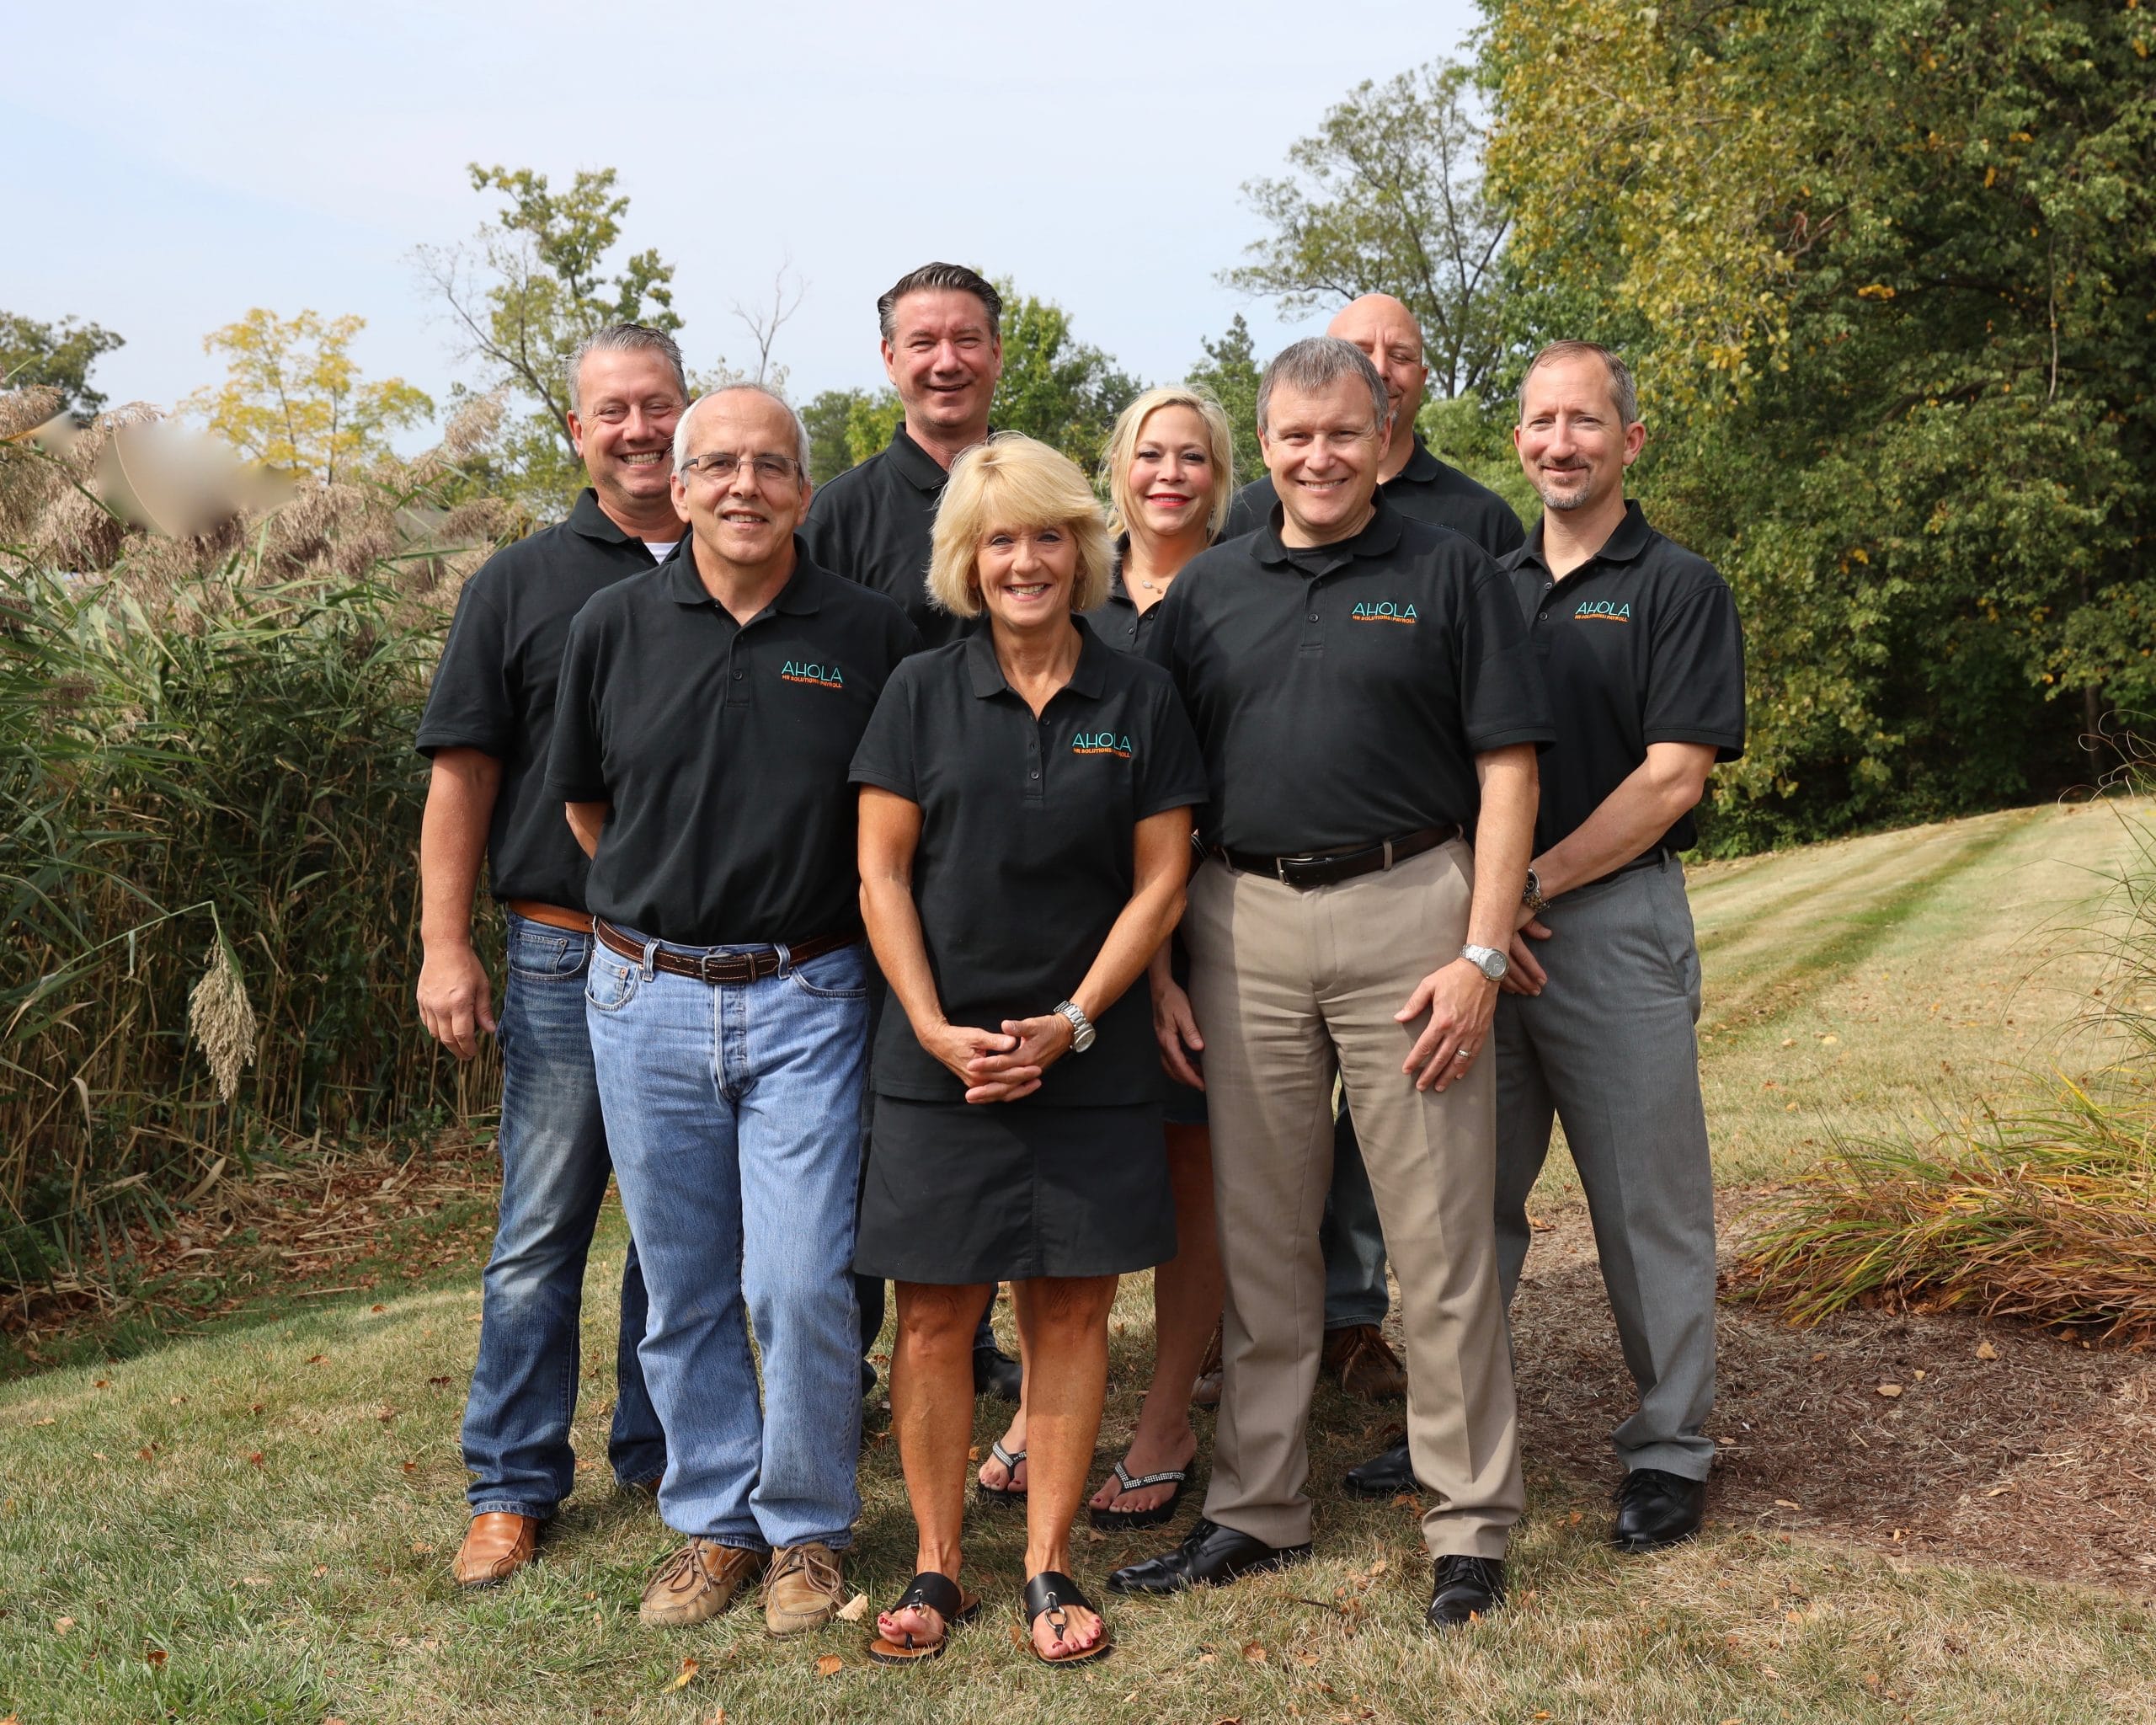 A group of Ahola employees smiling